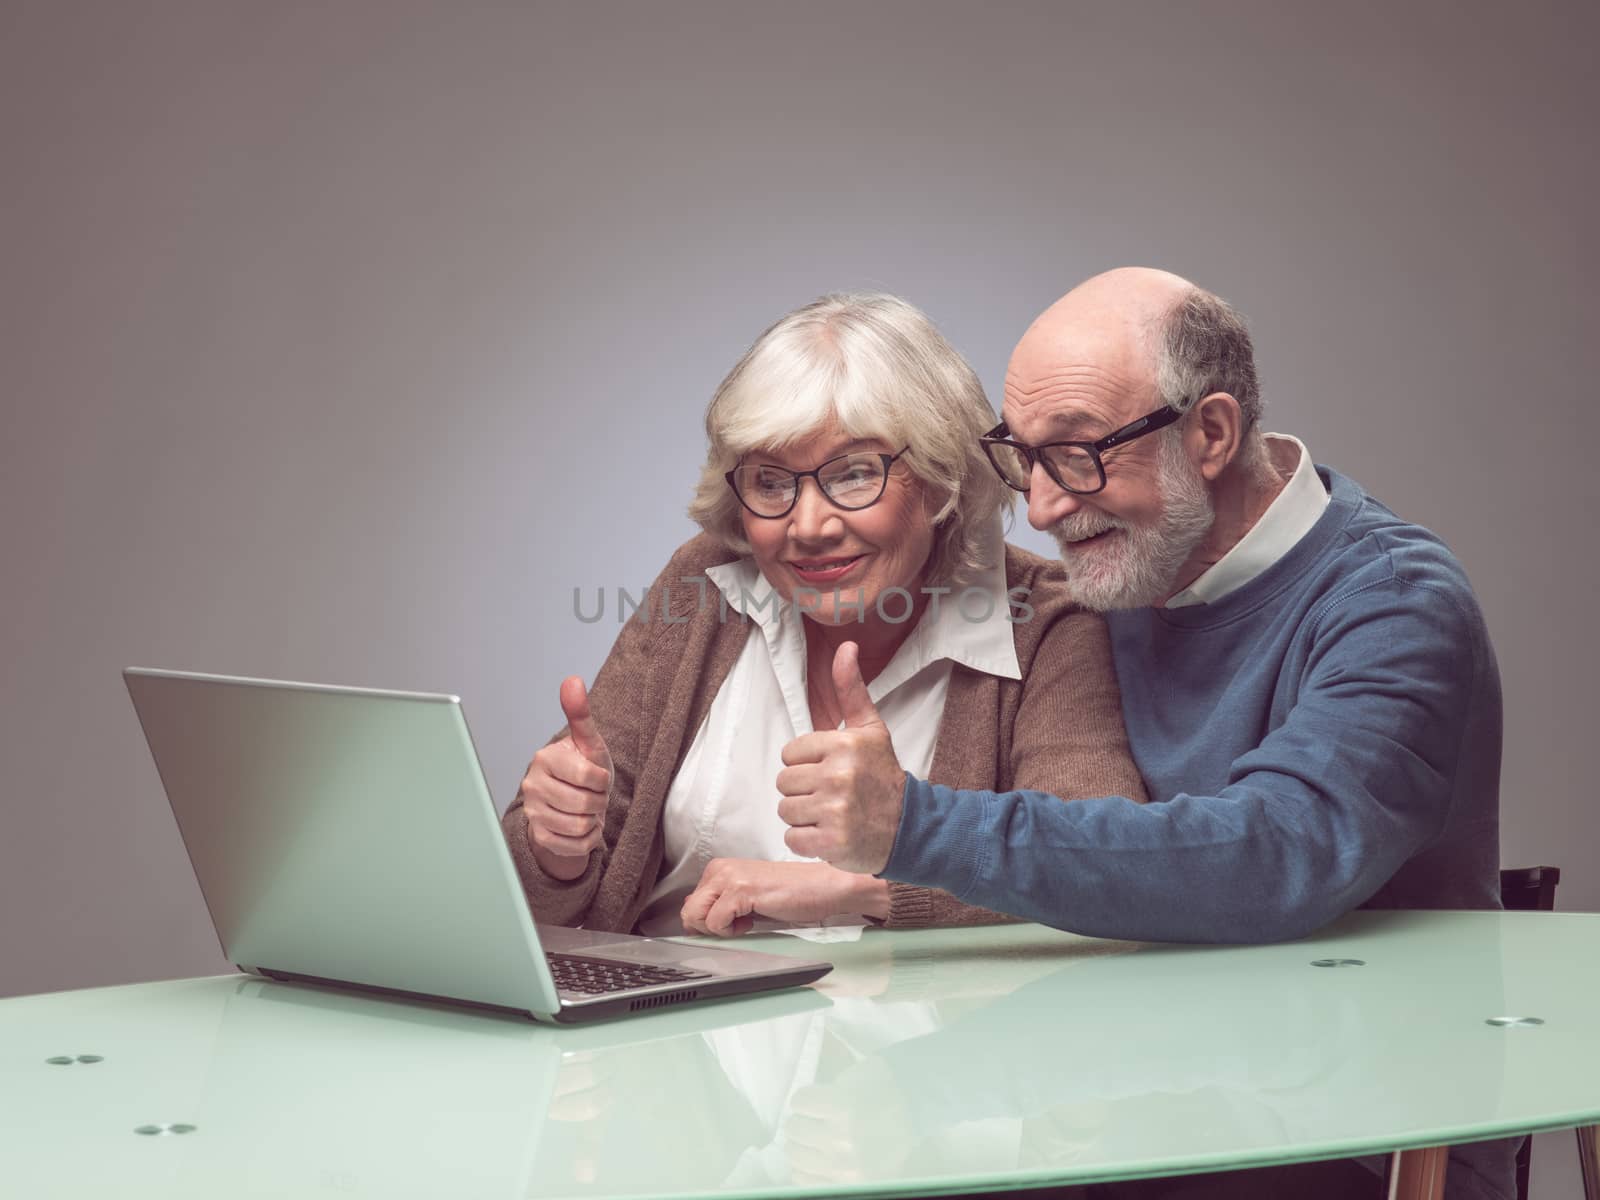 Senior couple using laptop together and smiling